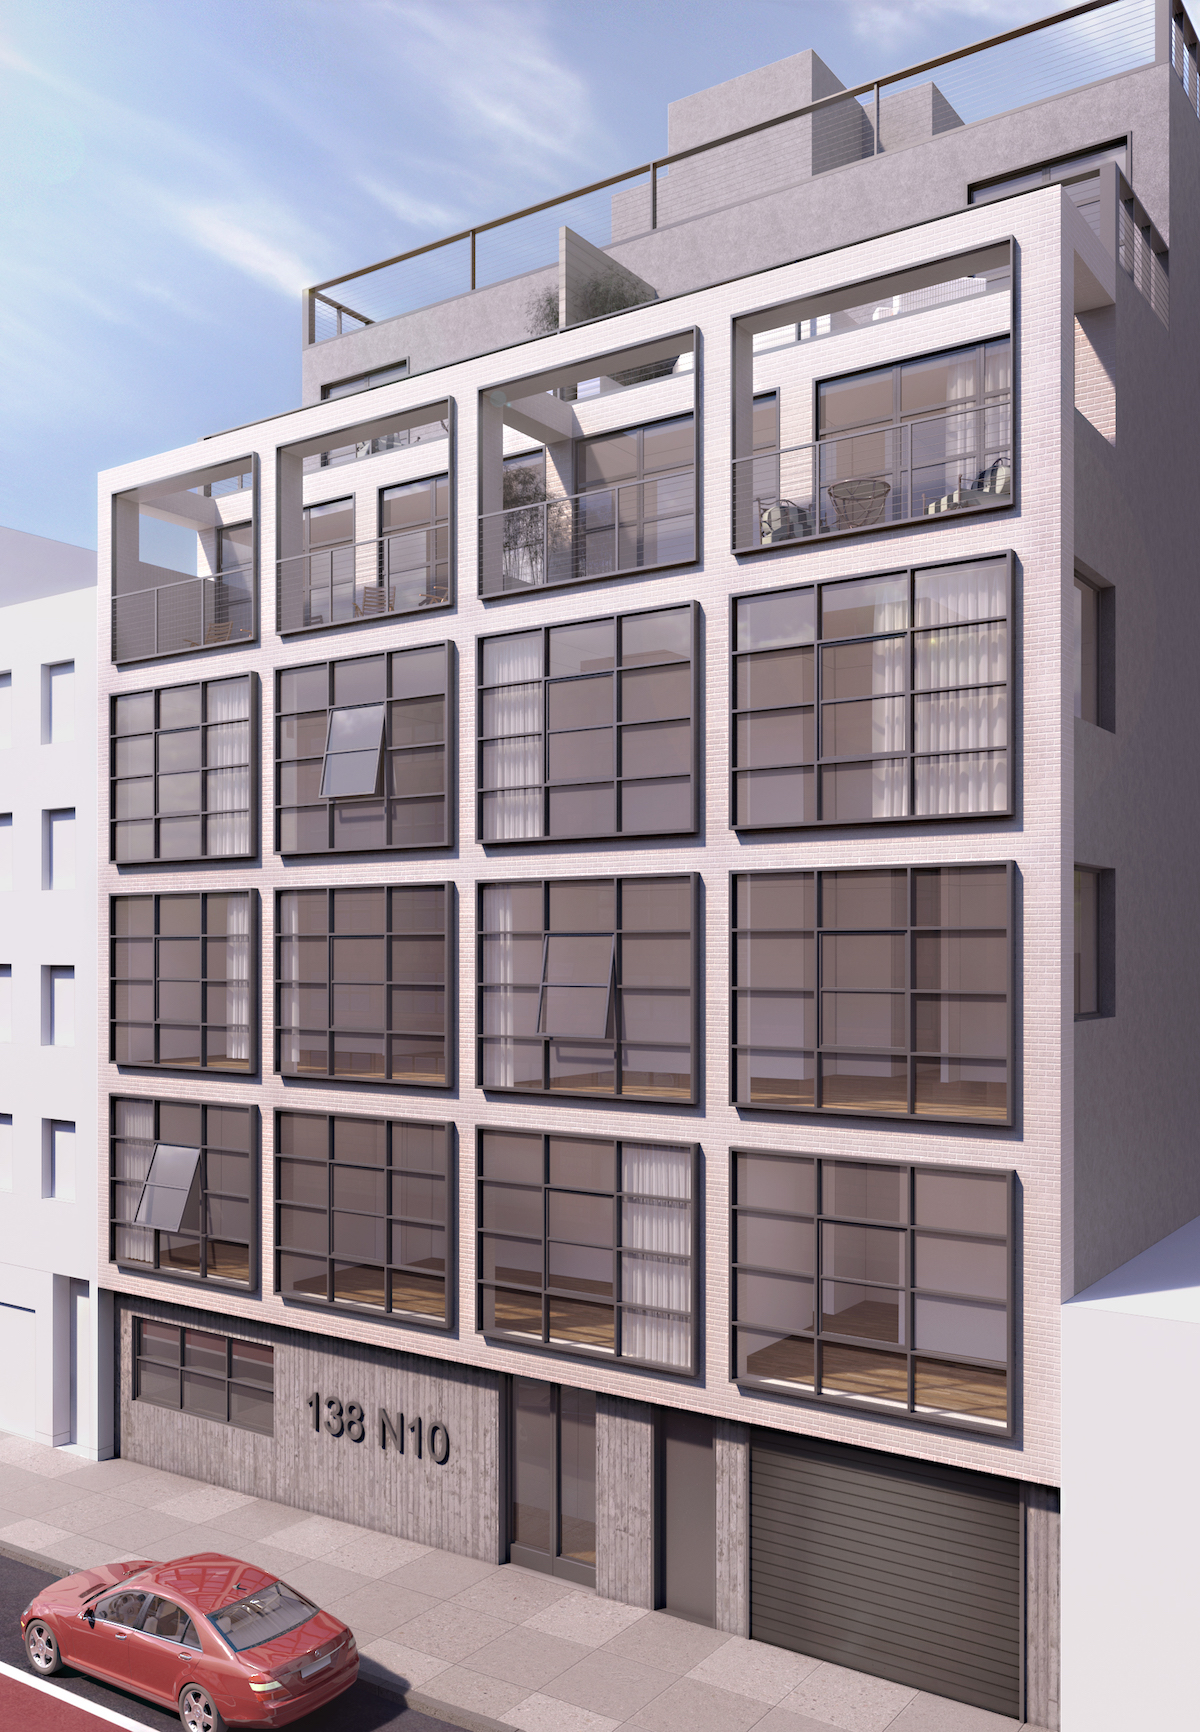 138 North 19th Street, rendering by Morris Adjmi Architects